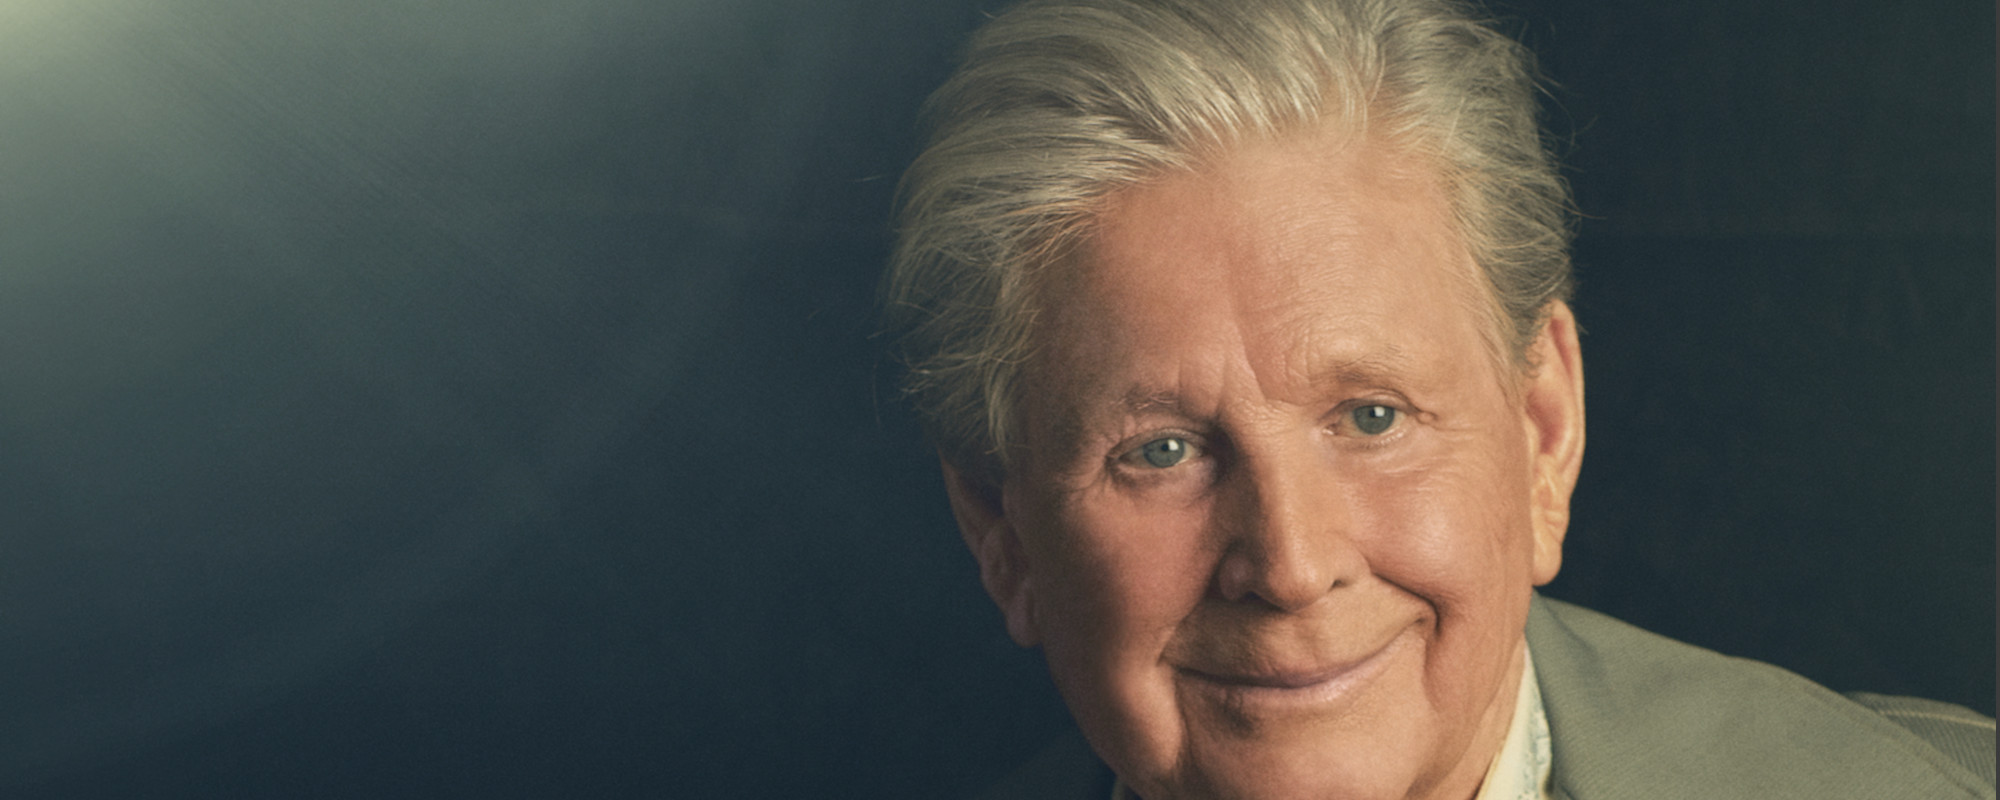 Brian Wilson: “The Piano and the Music I Create on it Has Probably Saved My Life”